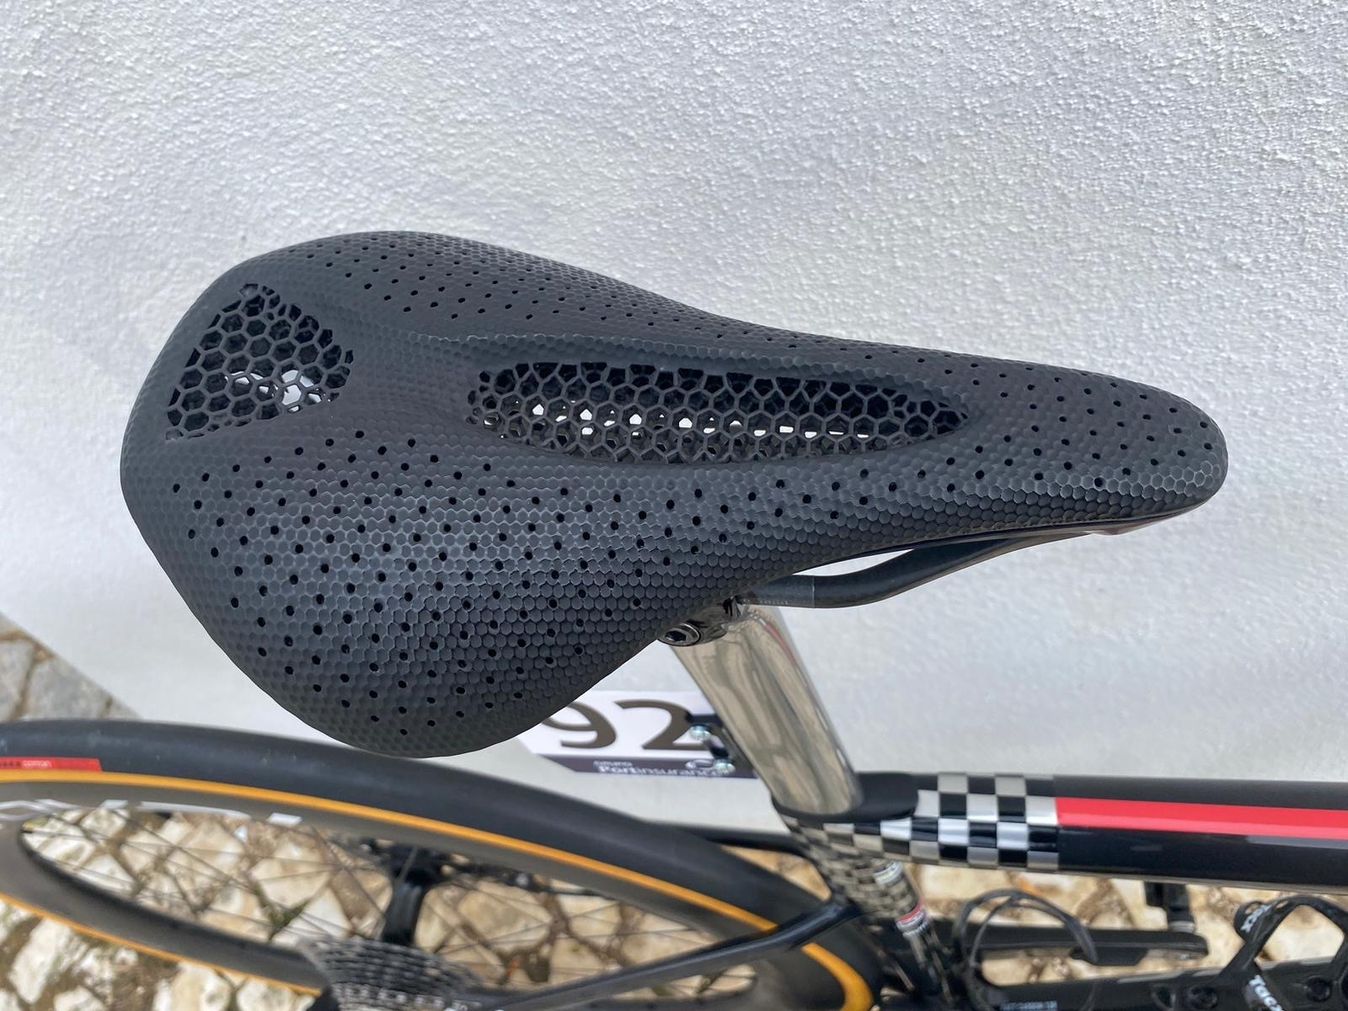 The 3D printed Specialized S-Works Power saddle has a variable density using a honeycomb structure 